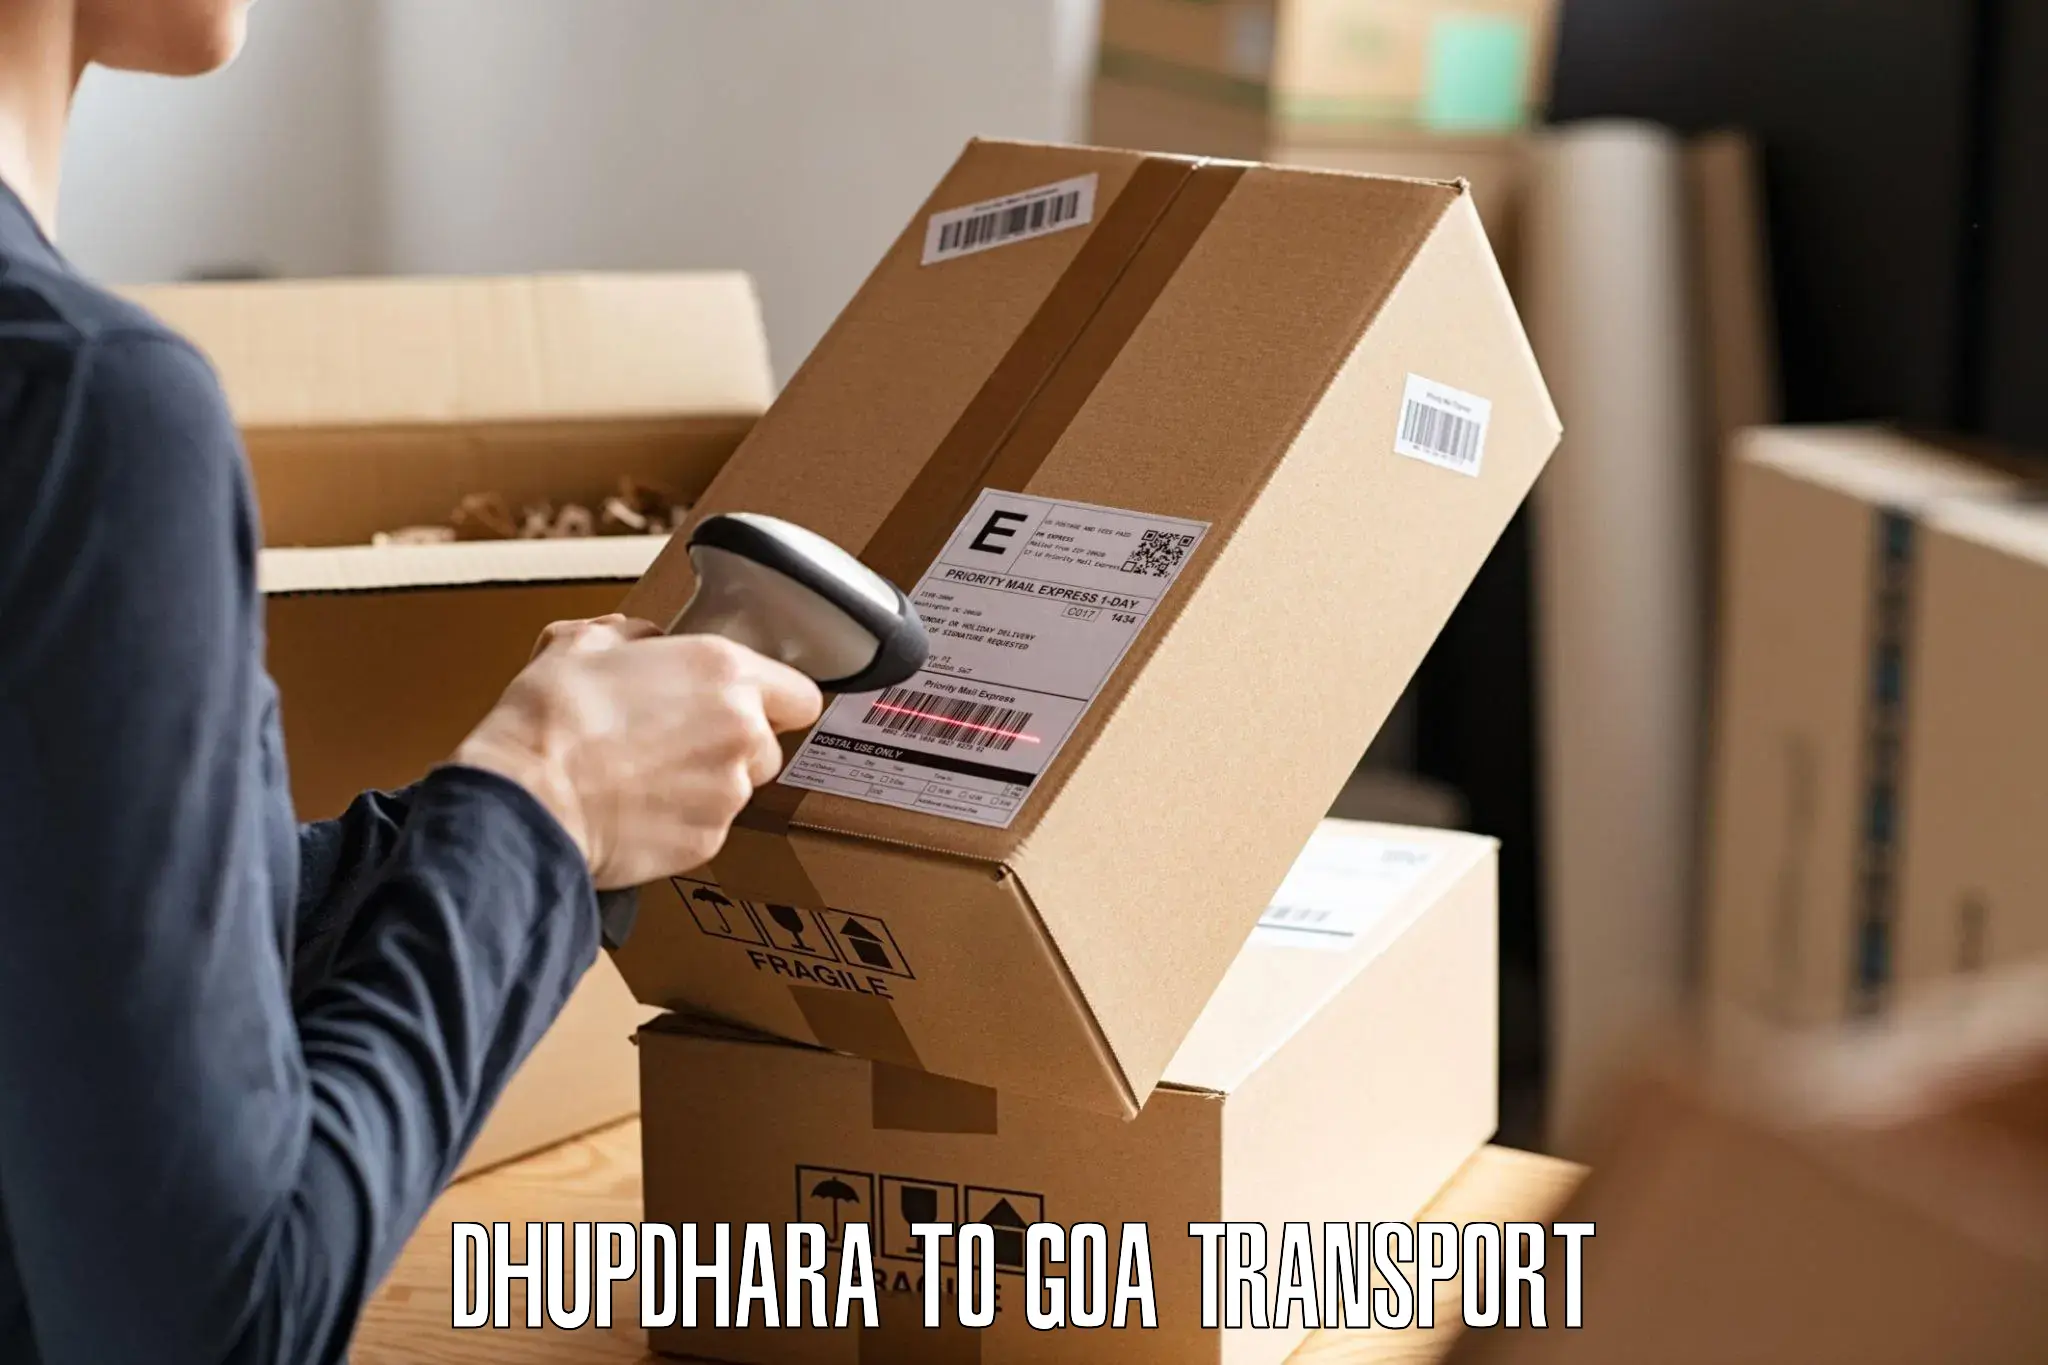 Delivery service Dhupdhara to IIT Goa